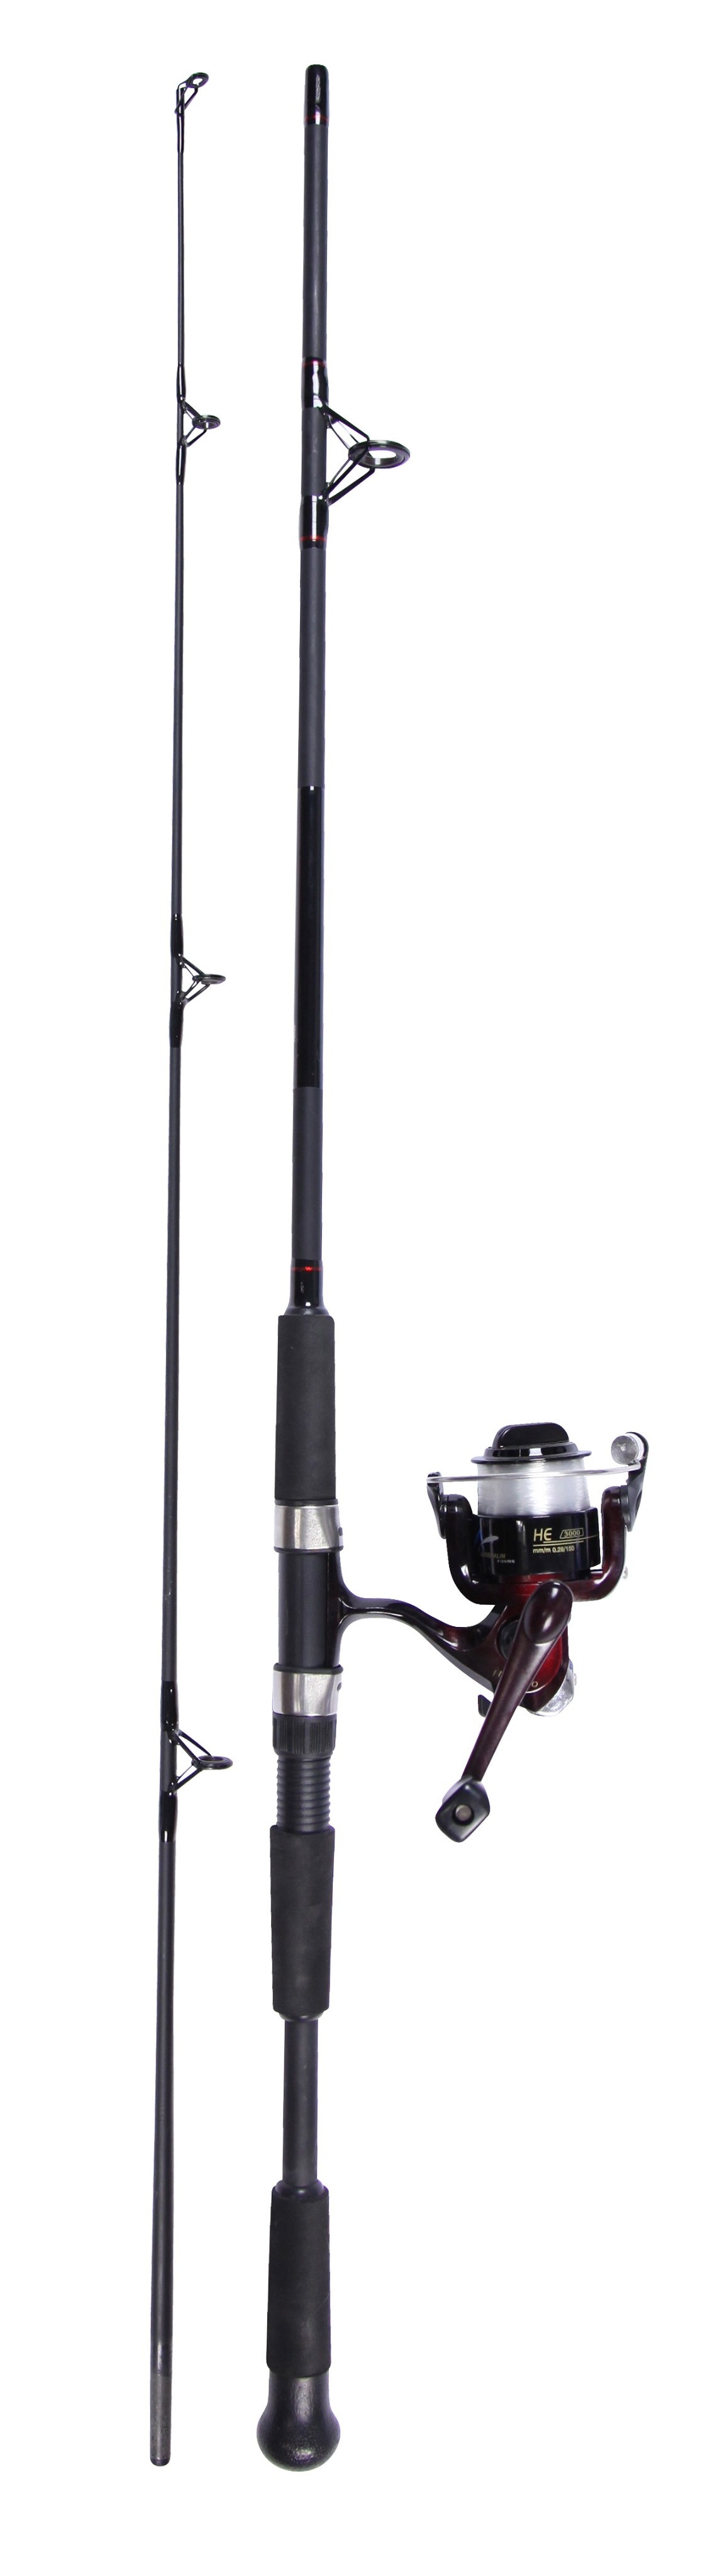 Adrenalin 12ft Rod and Reel Combo